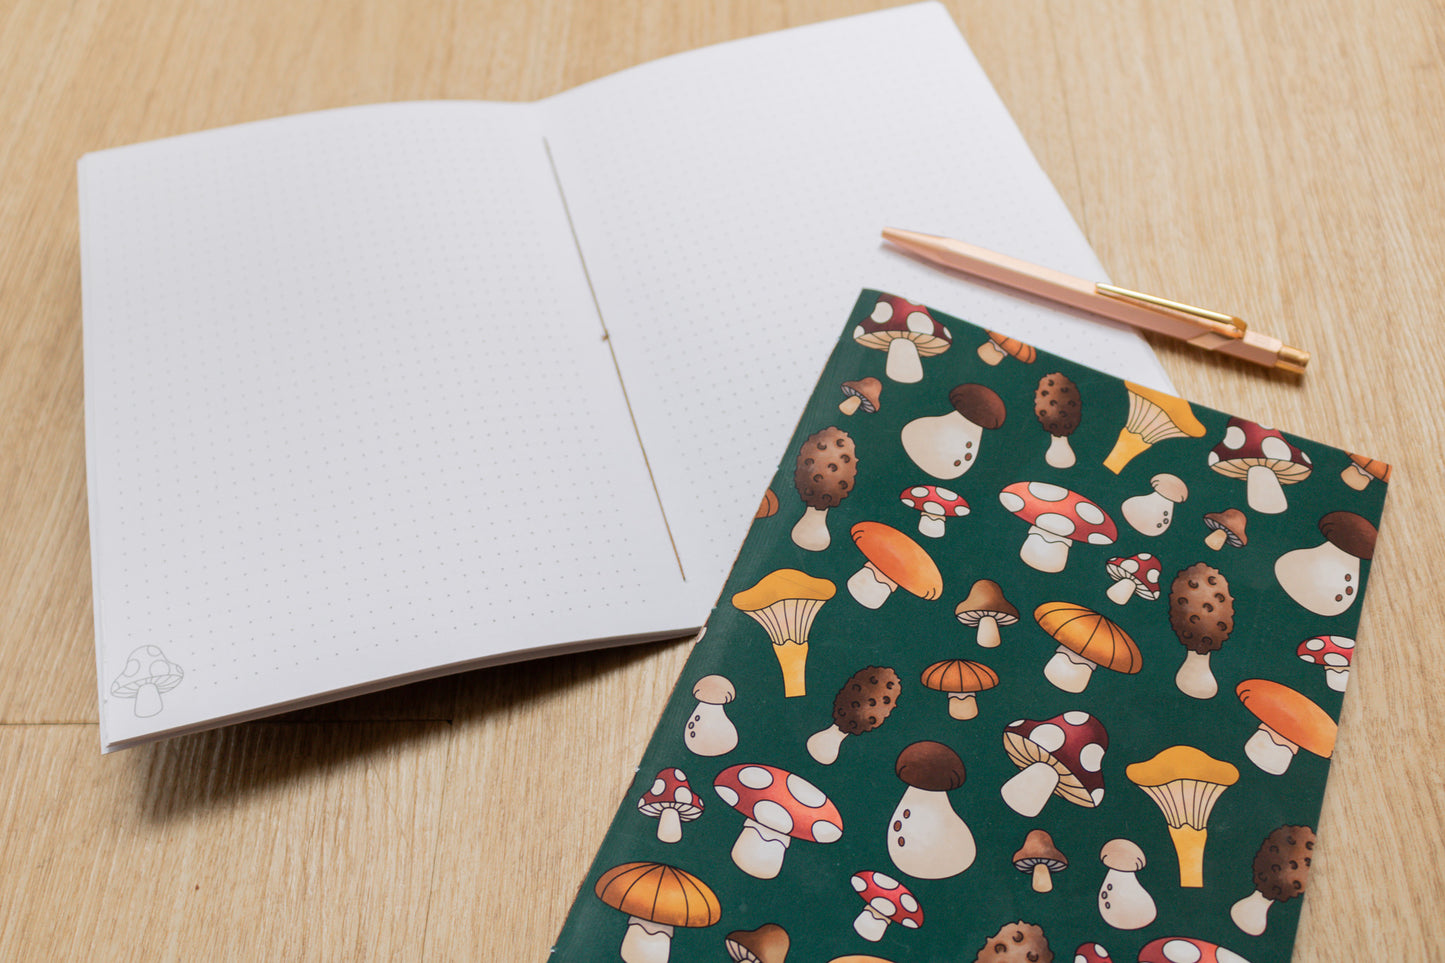 Handmade A5 notebook with mushroom design by MellowApricotStudio - close up